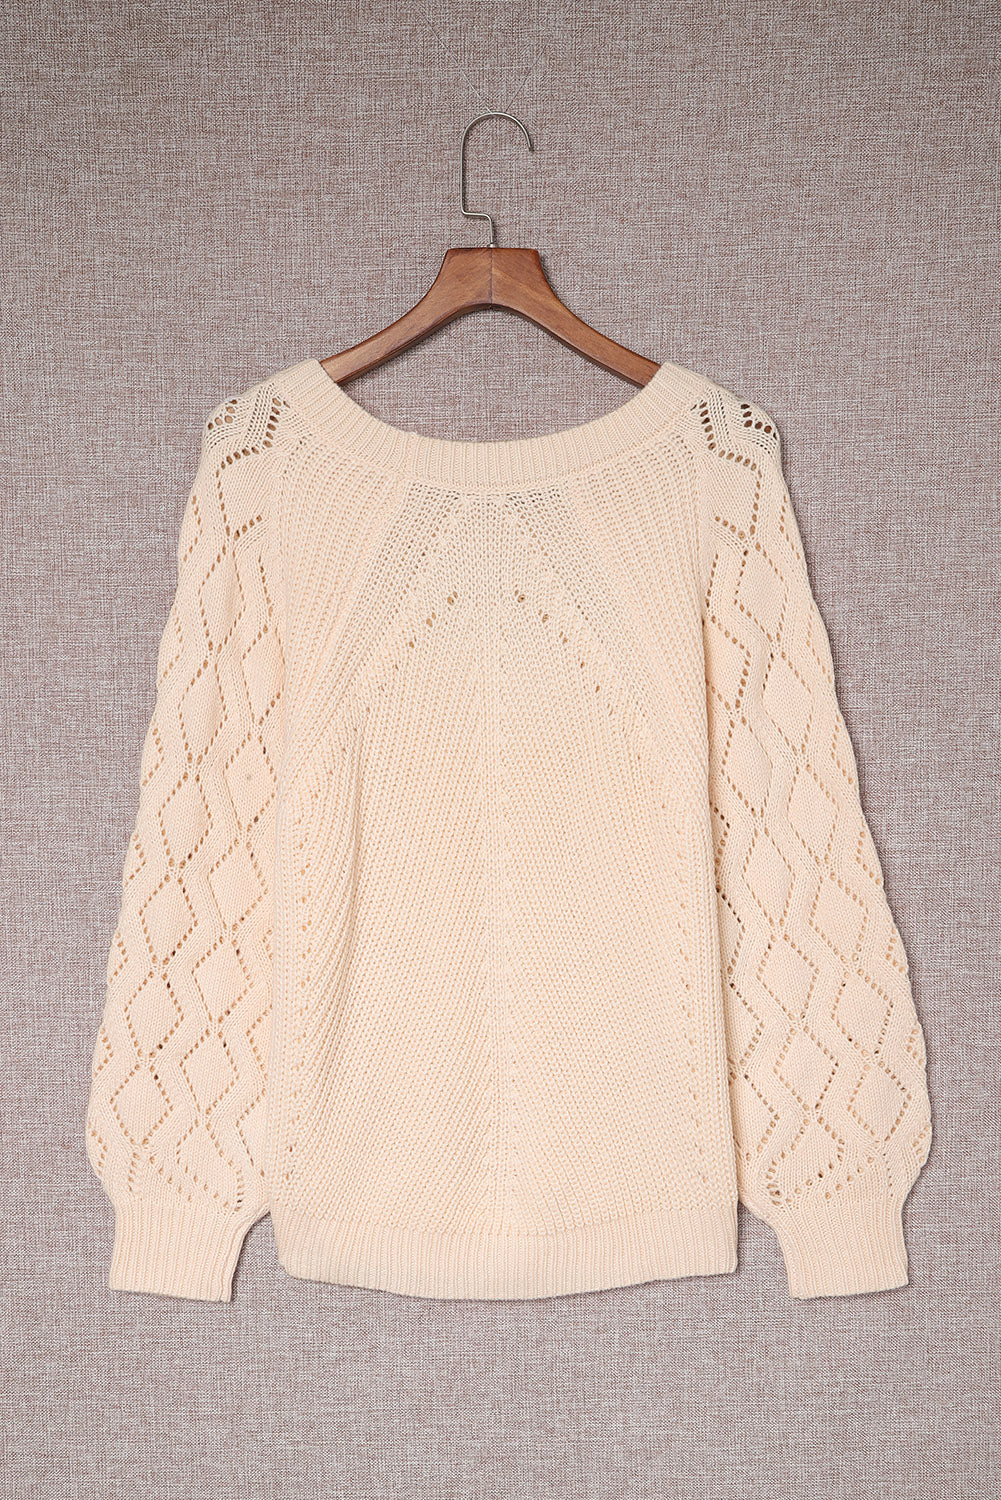 Gray Hollow-out Puffy Sleeve Knit Sweater